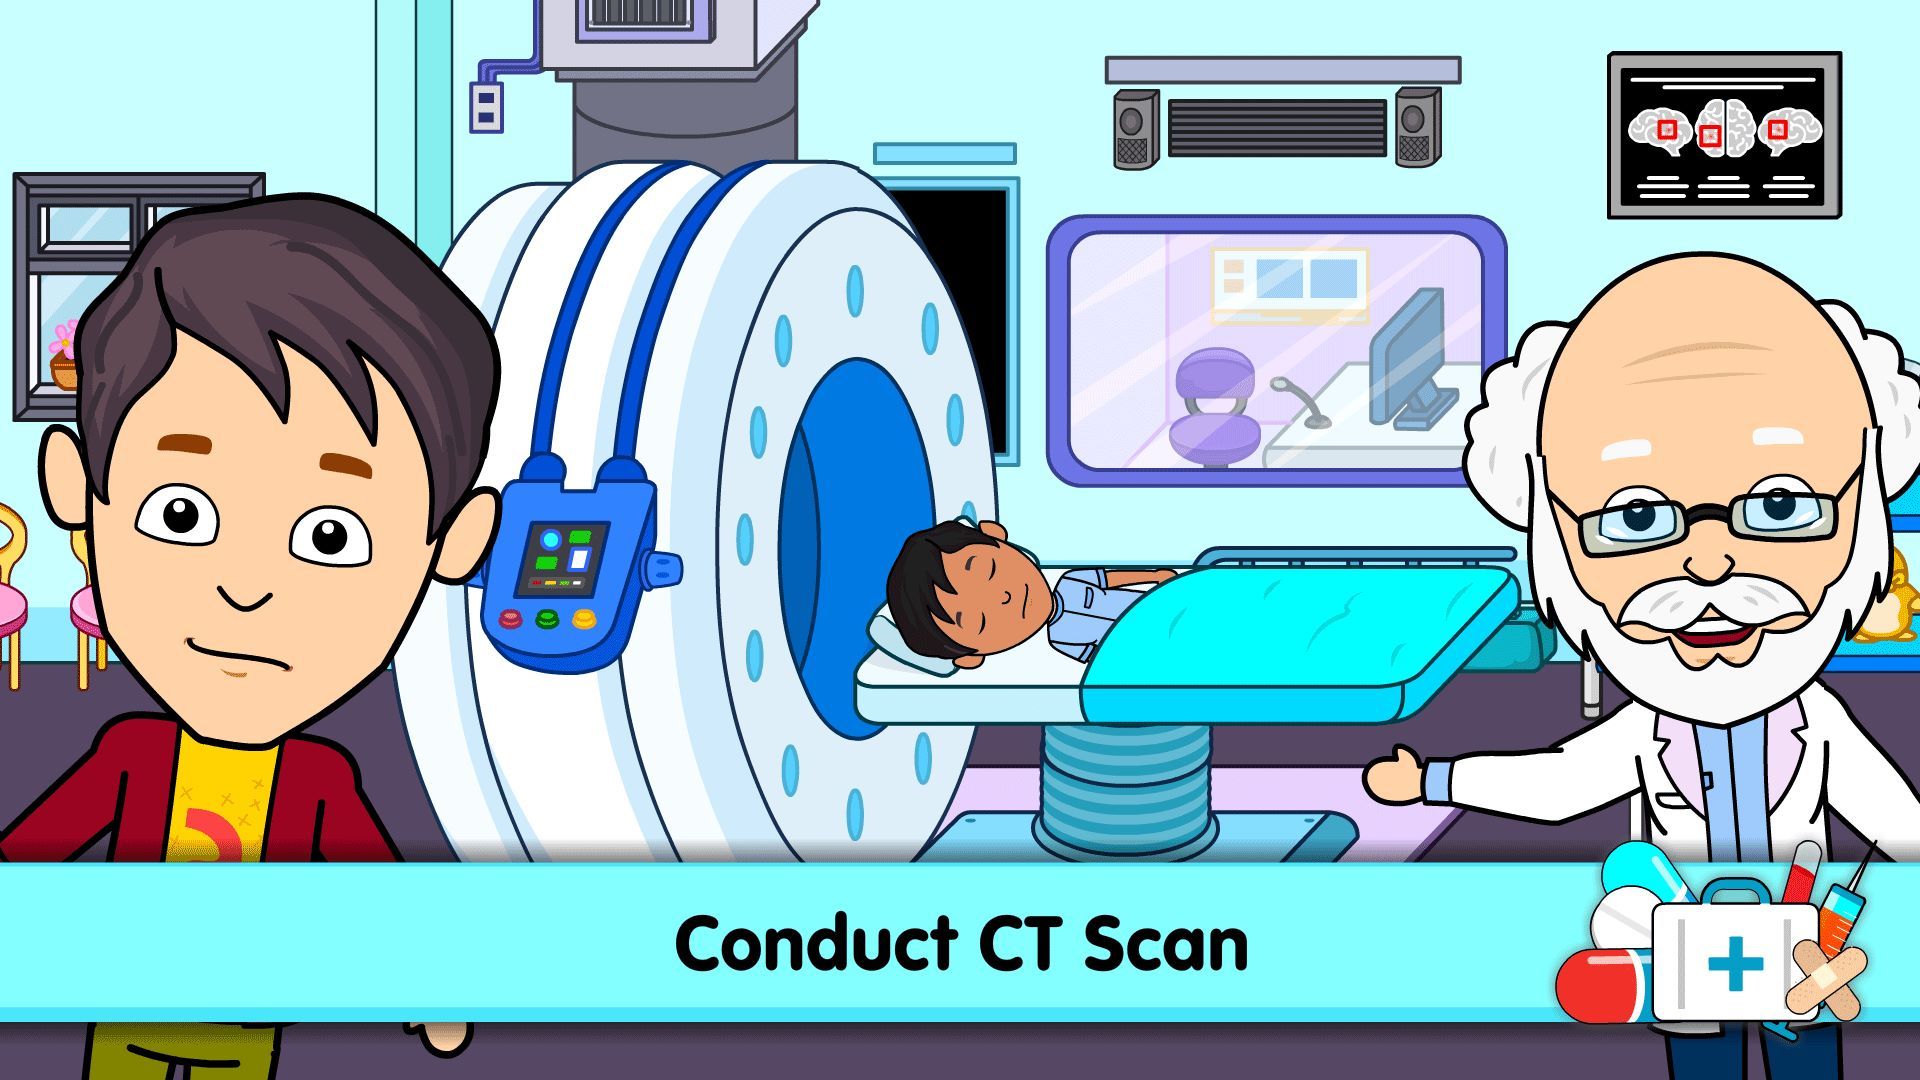 My Tizi Town Hospital - Role Playing Doctor Games for Kids